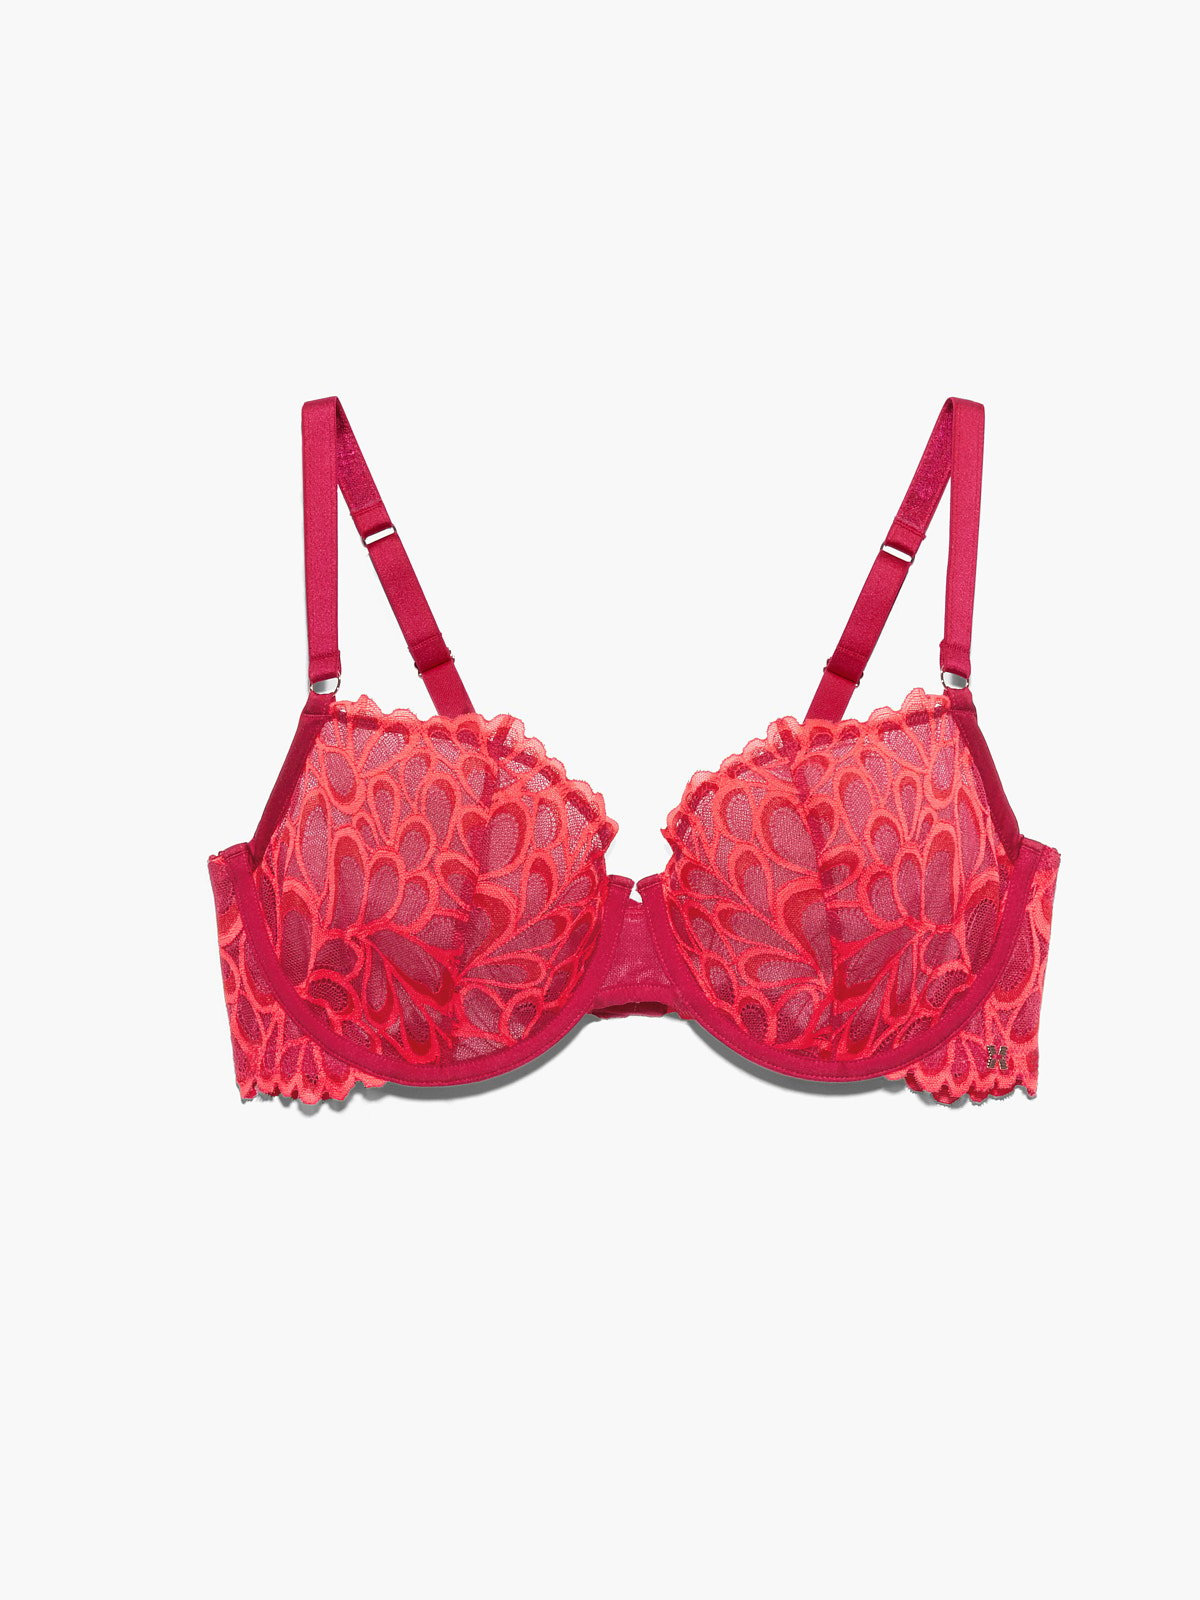 https://cdn.savagex.com/media/images/products/BA2042991-6222/SAVAGE-NOT-SORRY-UNLINED-LACE-BALCONETTE-BRA-BA2042991-6222-LAYDOWN-1200x1600.jpg